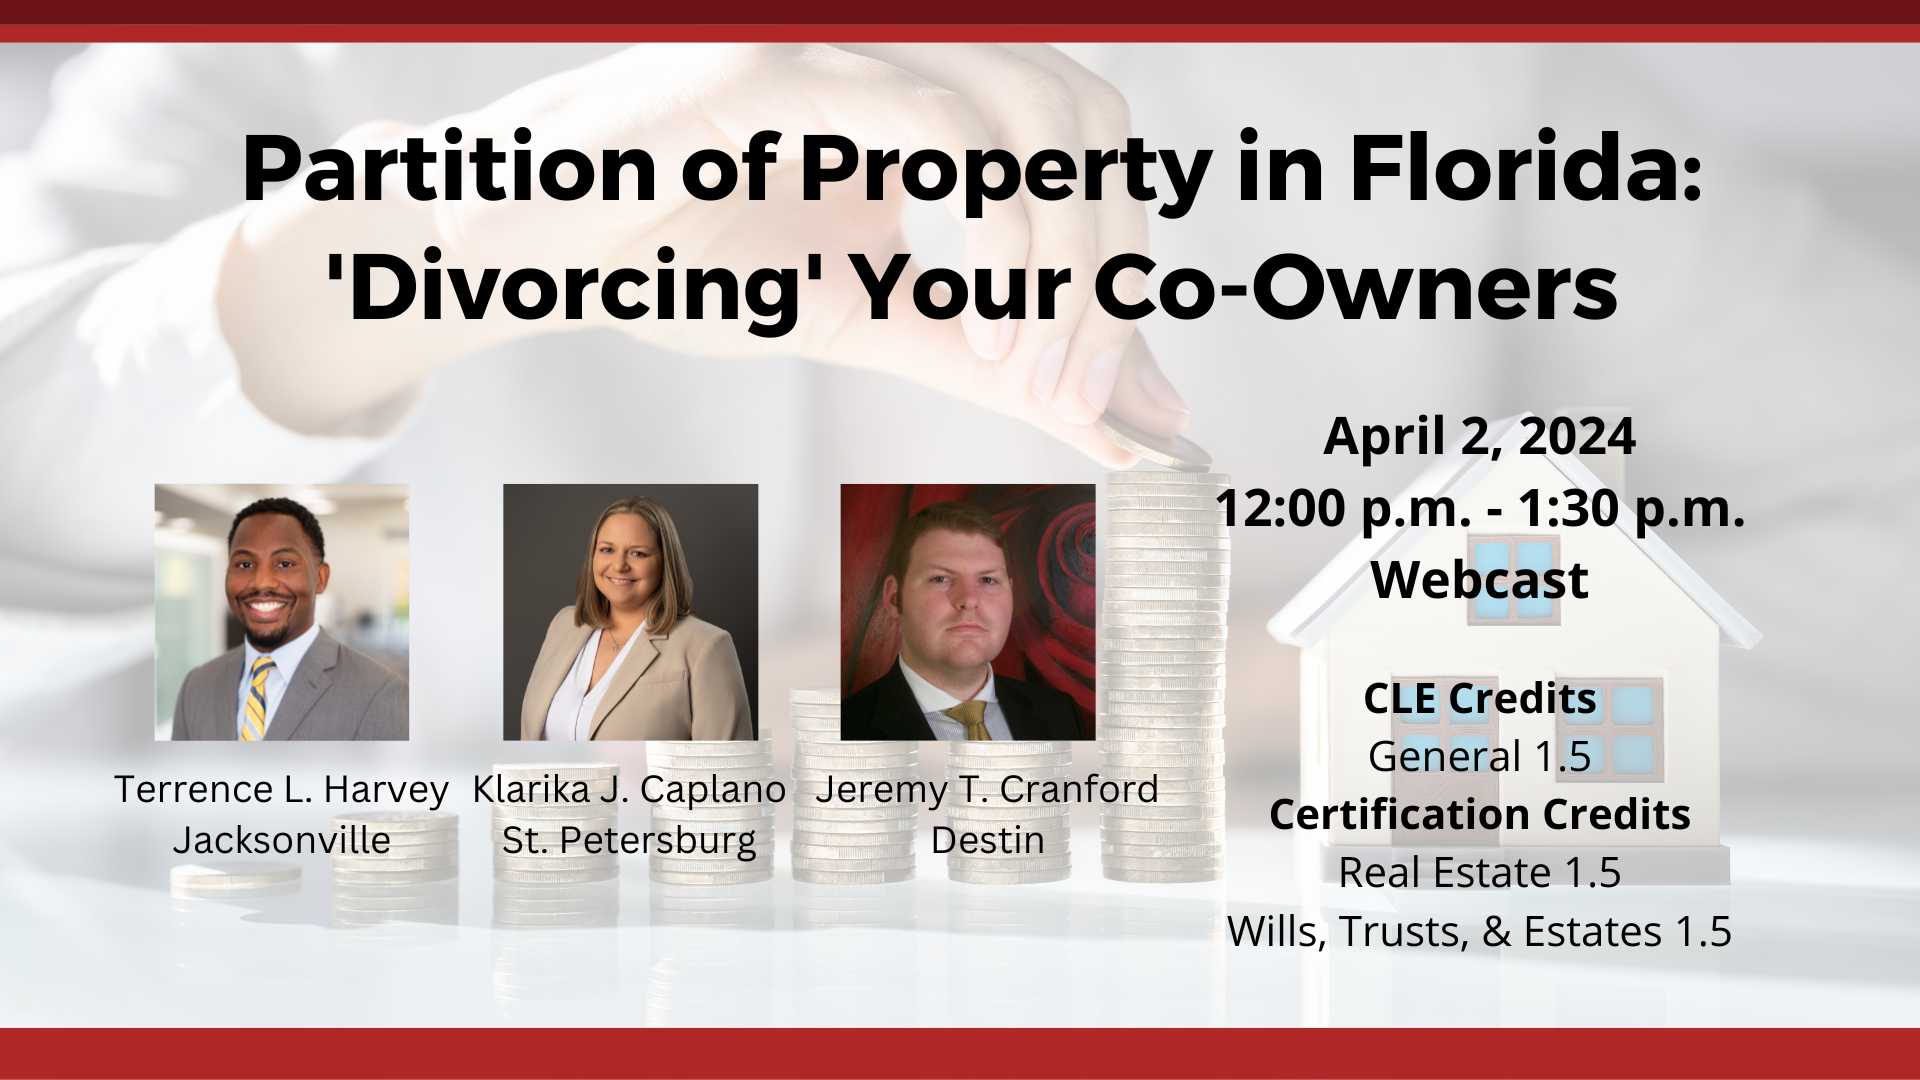 Partition of Property in Florida: 'Divorcing' Your Co-Owners